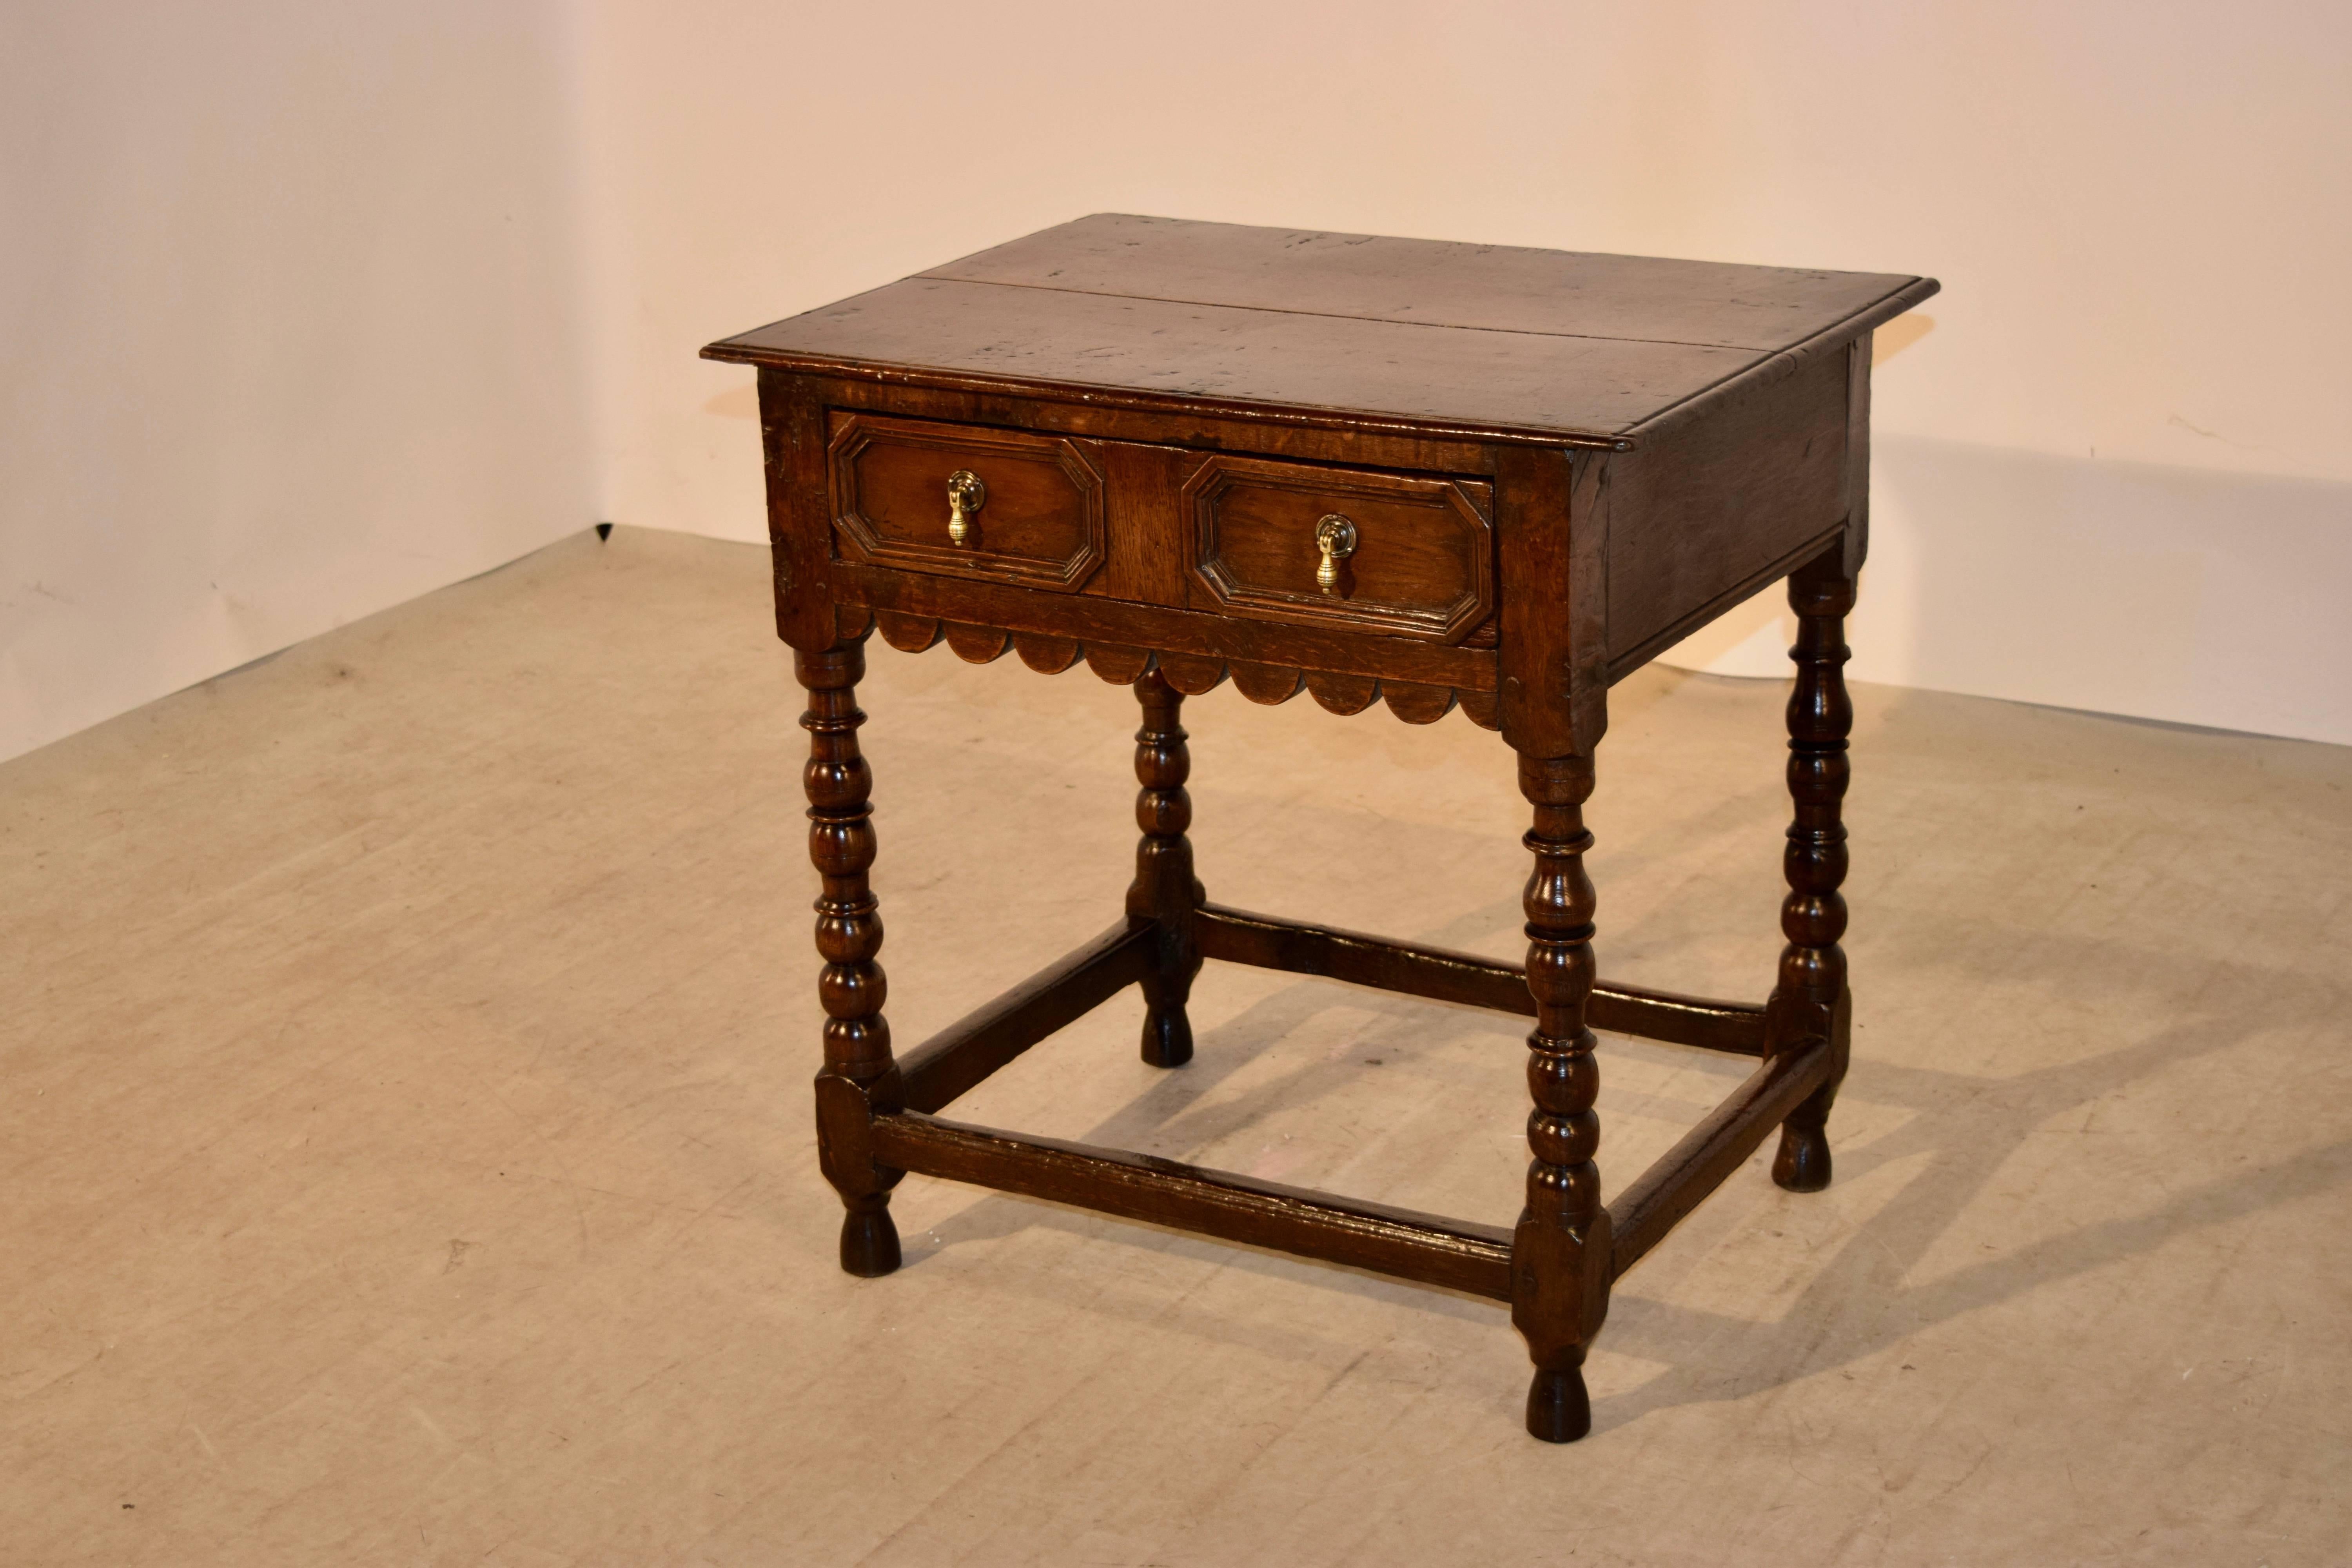 18th century English oak side table with a two plank top, which has beveled edges, following down to a simple apron which contains a single drawer in the front with raised panel geometric molded decoration. There is scalloped decoration underneath